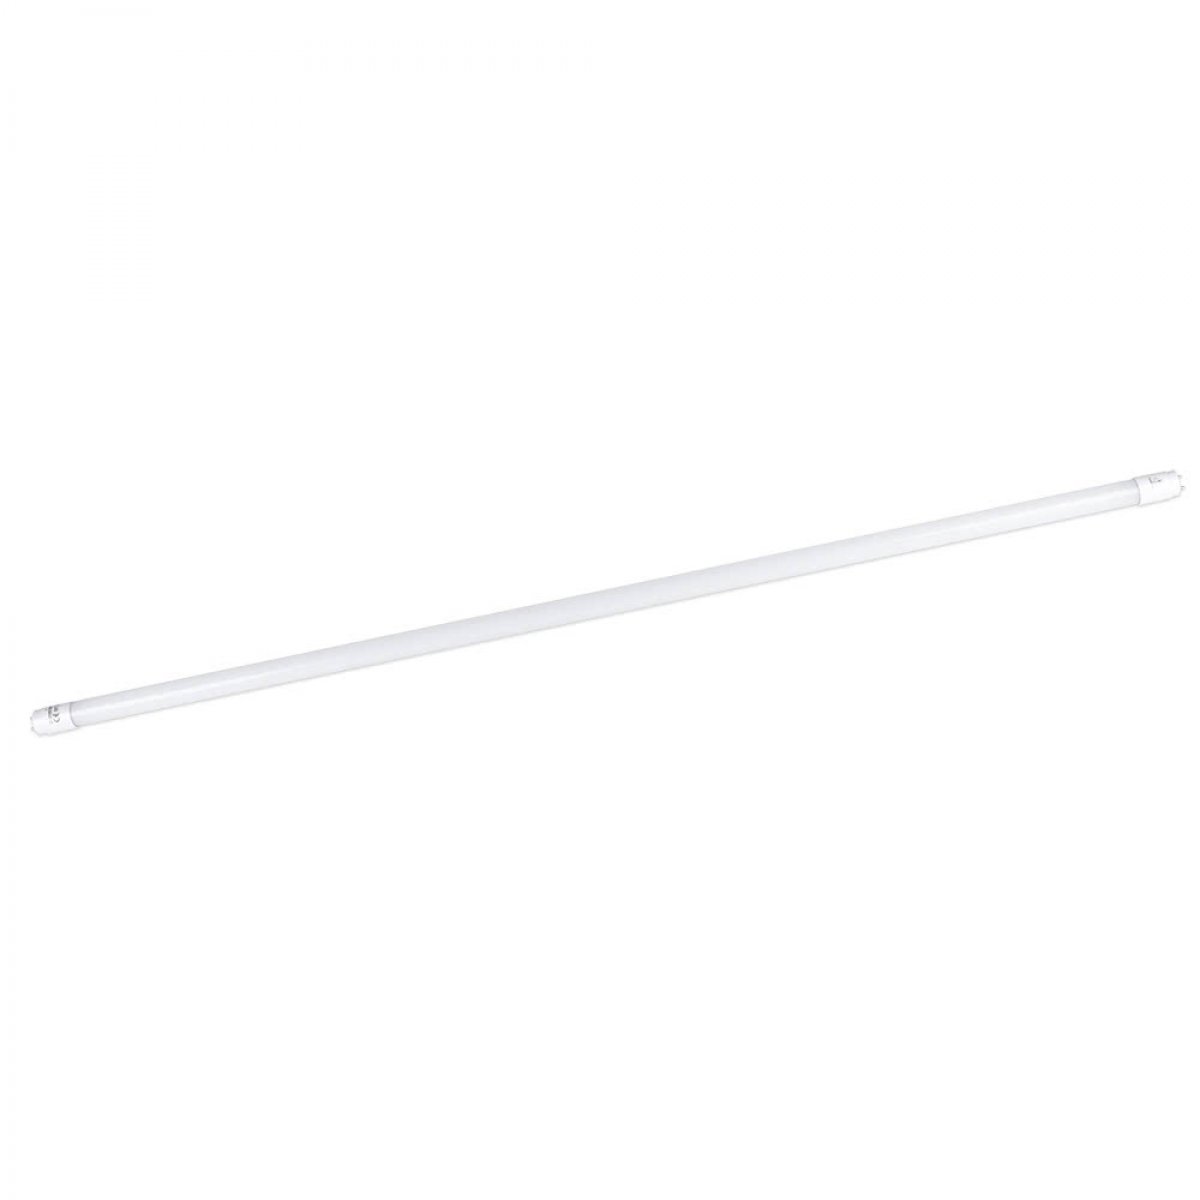 TUBO LED 18W T8 NEUTRA 120CMTS (1800L) HERITAGE